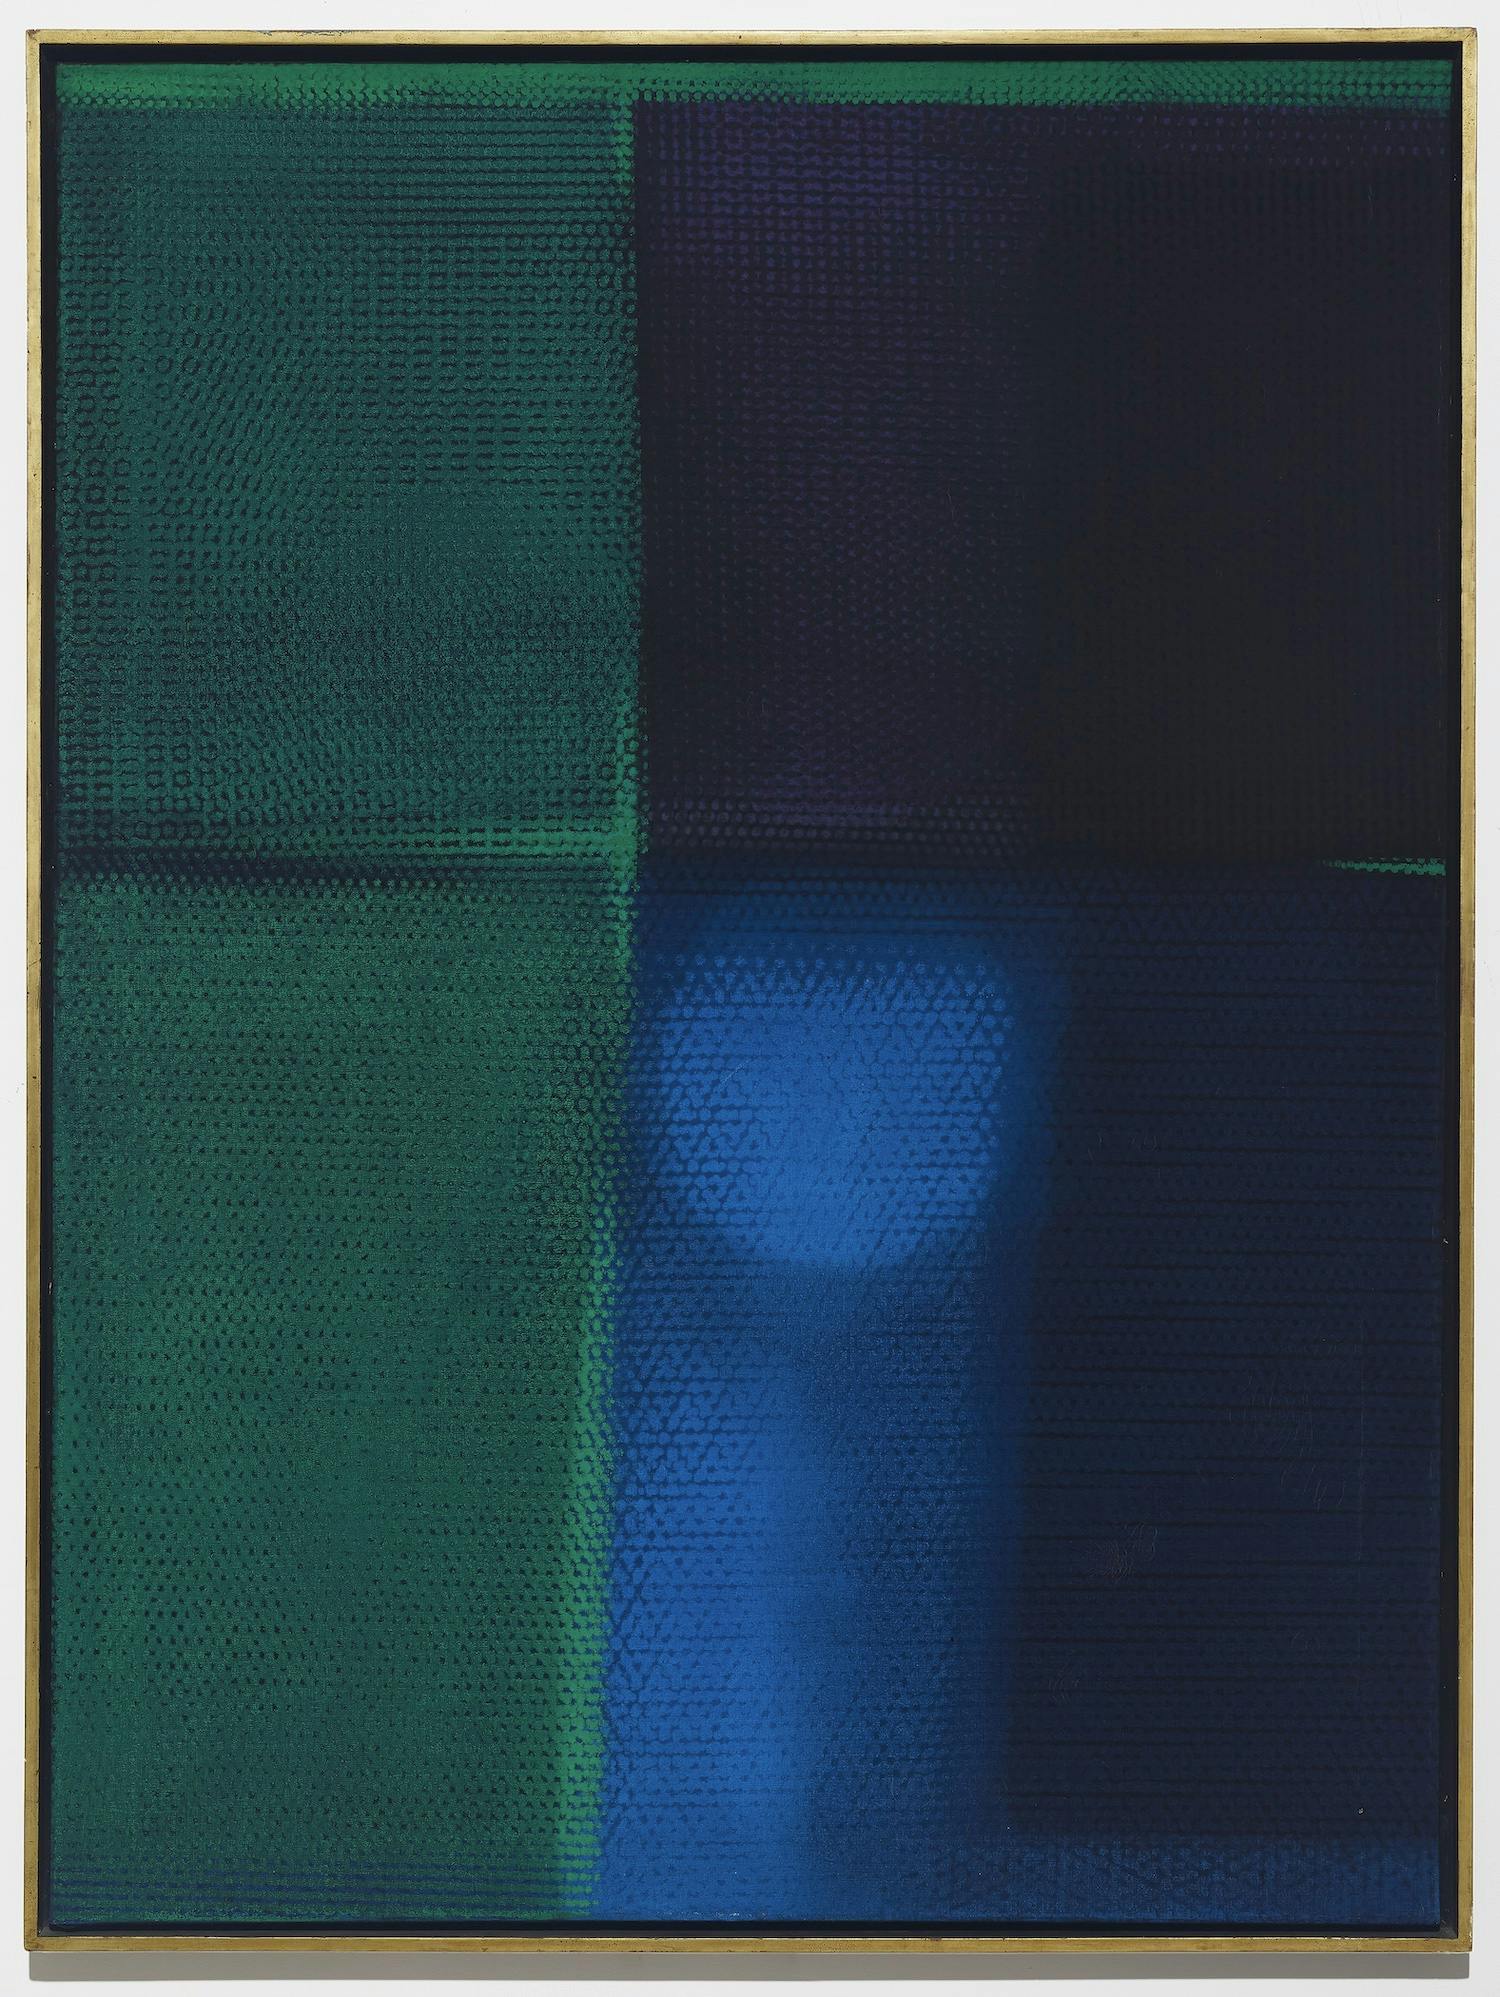 Aluminum foil painting by José Antonio Fernández-Muro that uses the impressions of various urban textures that are then overlaid with a blue and green pigment.